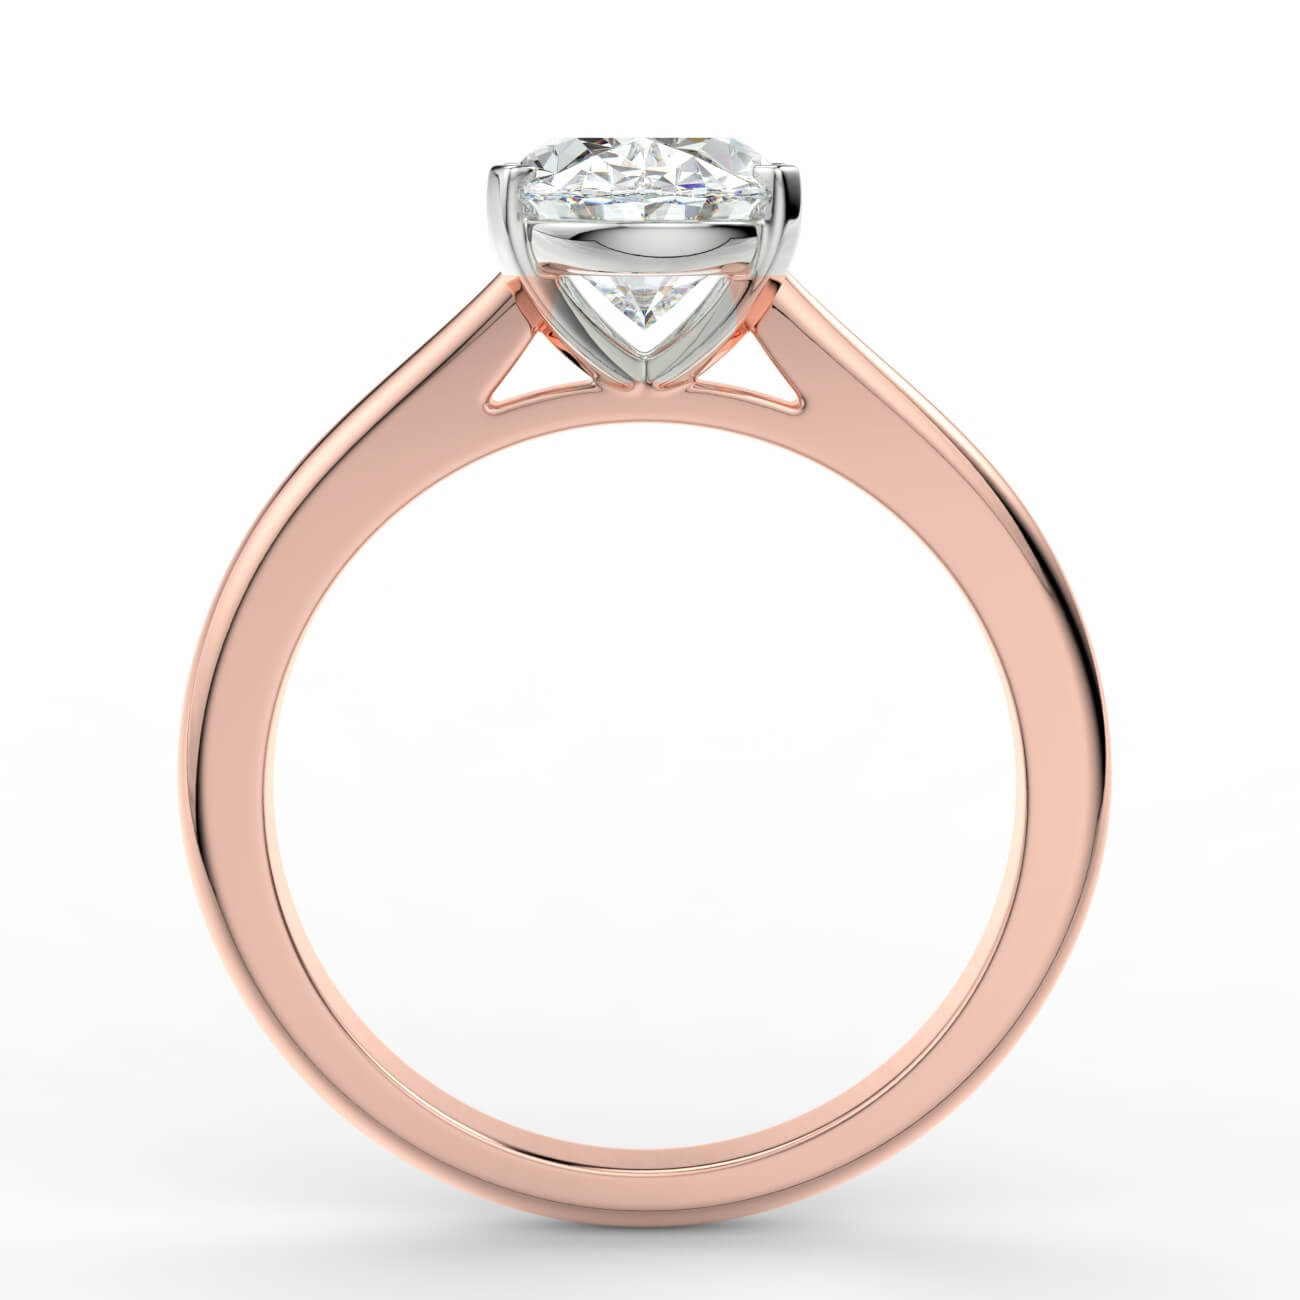 Oval cut diamond cathedral engagement ring in rose and white gold – Australian Diamond Network